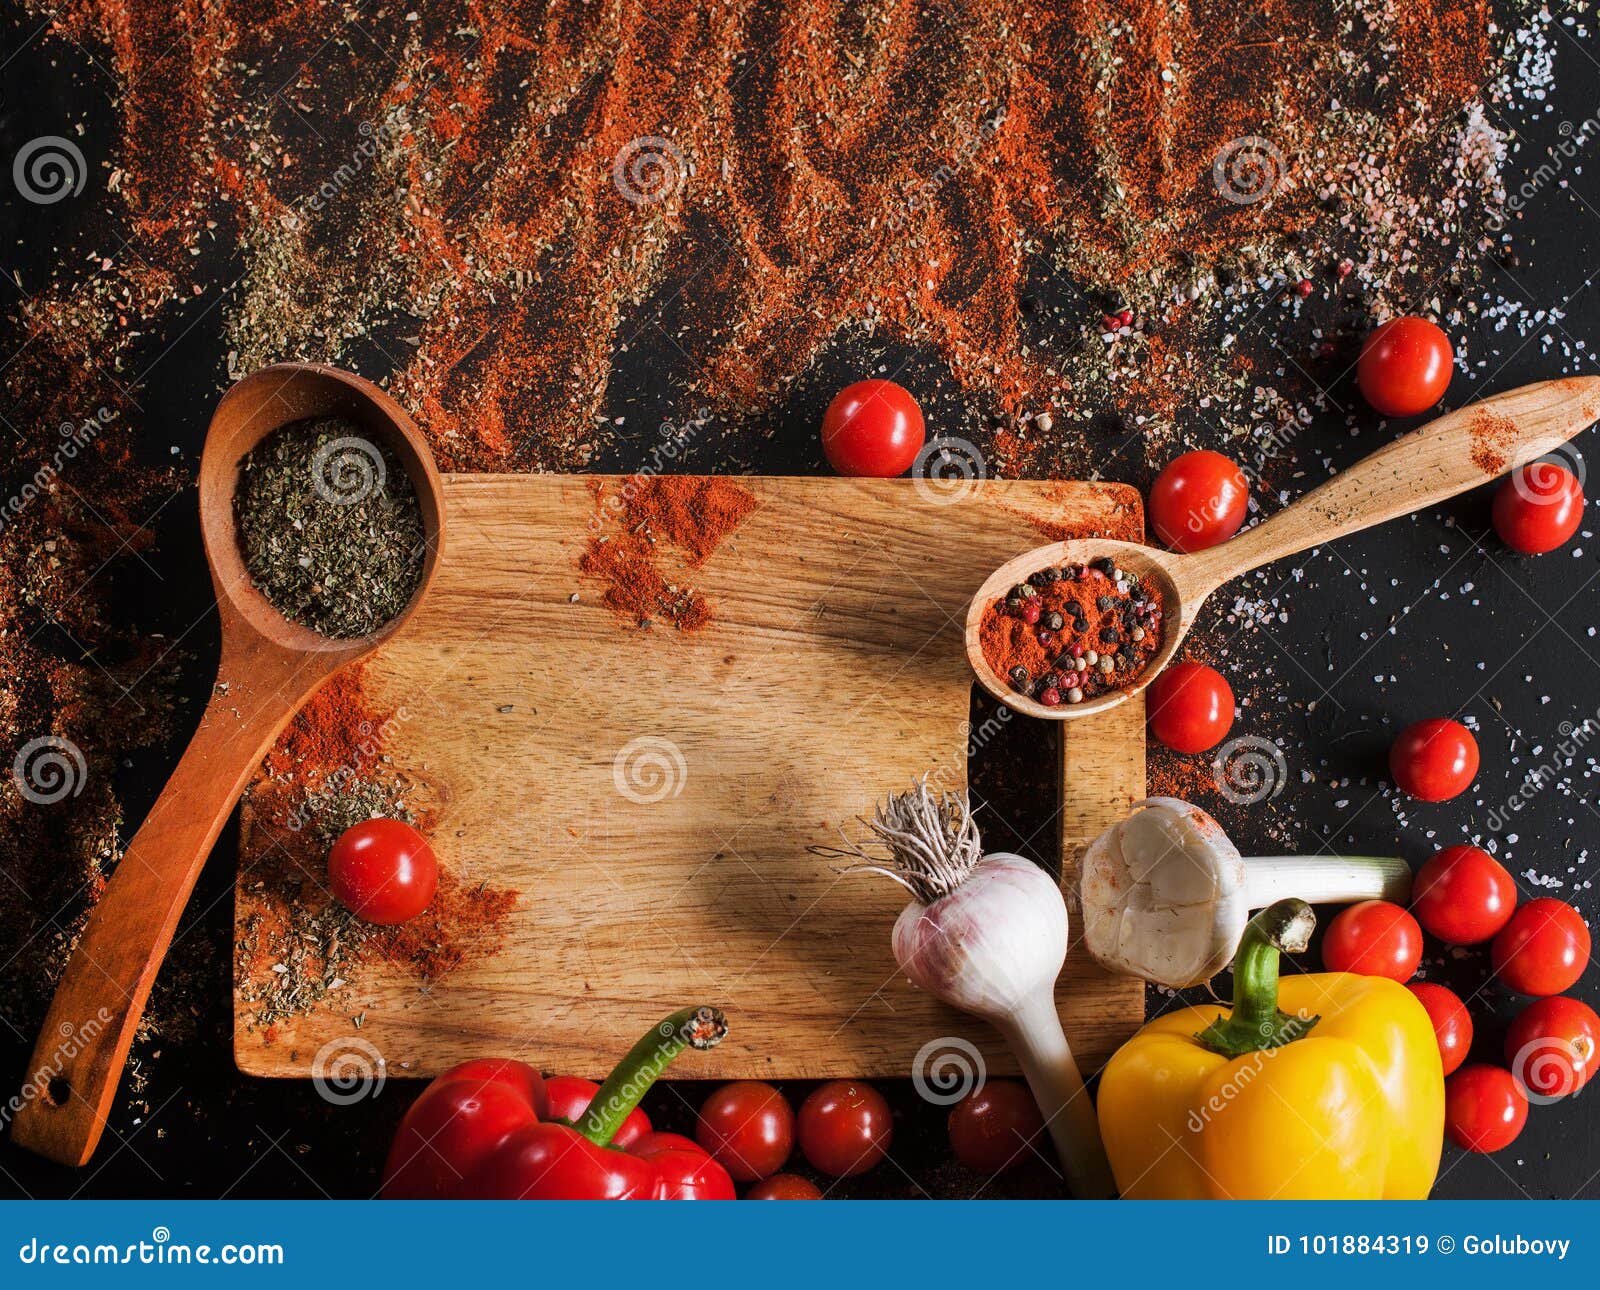 Spices. Culinary, Cuisine, Recipe Background Stock Image - Image of ...